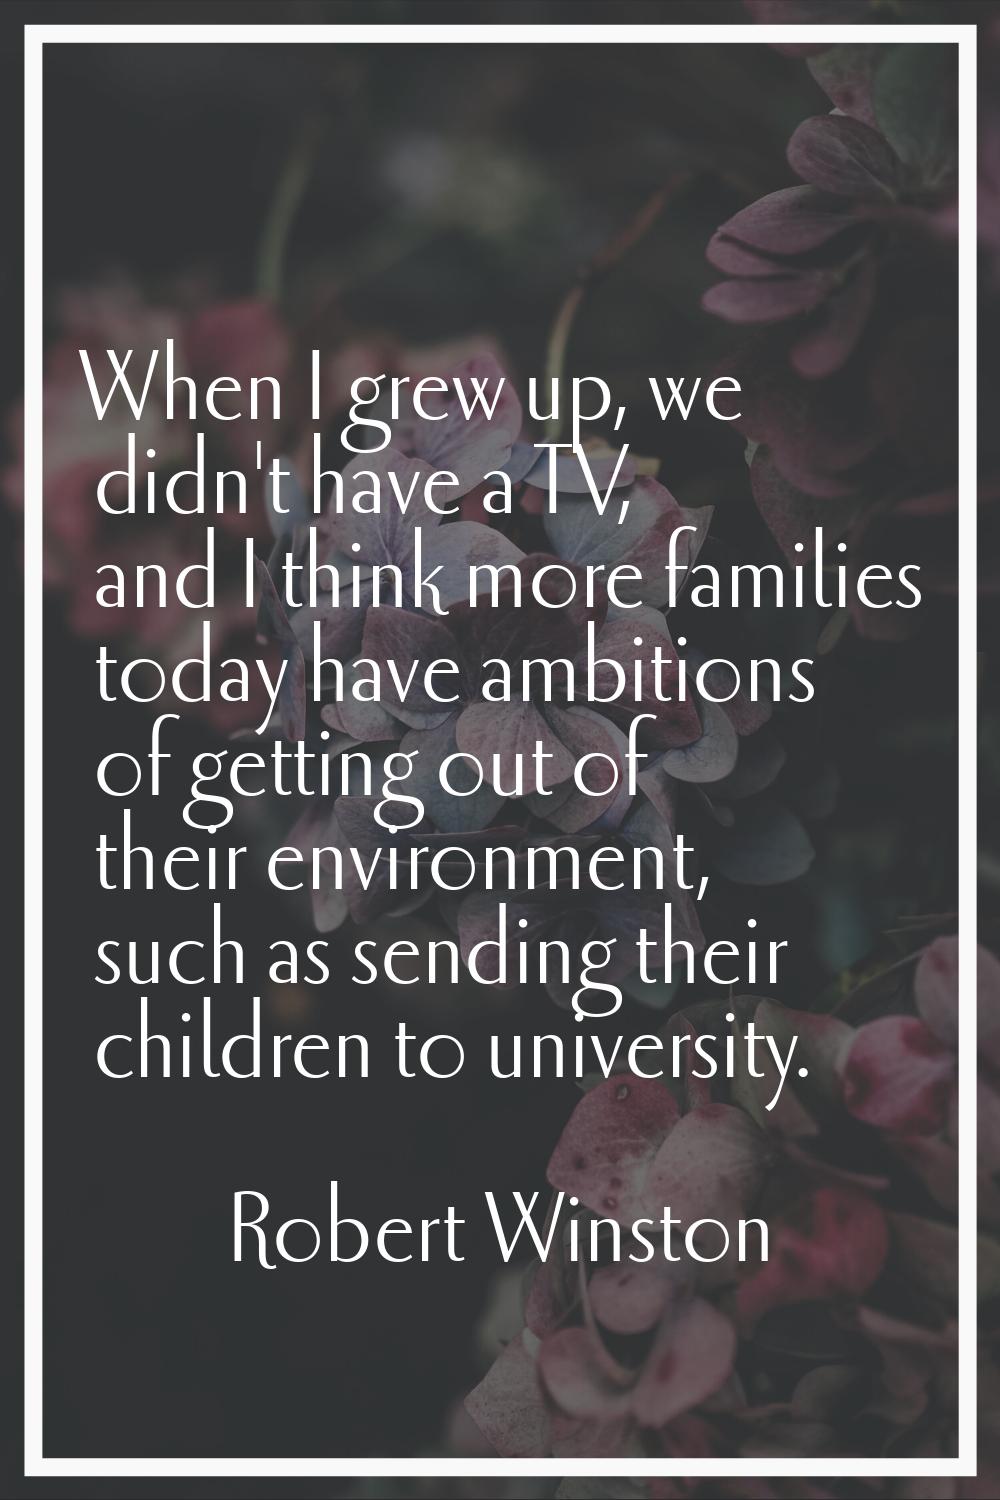 When I grew up, we didn't have a TV, and I think more families today have ambitions of getting out 